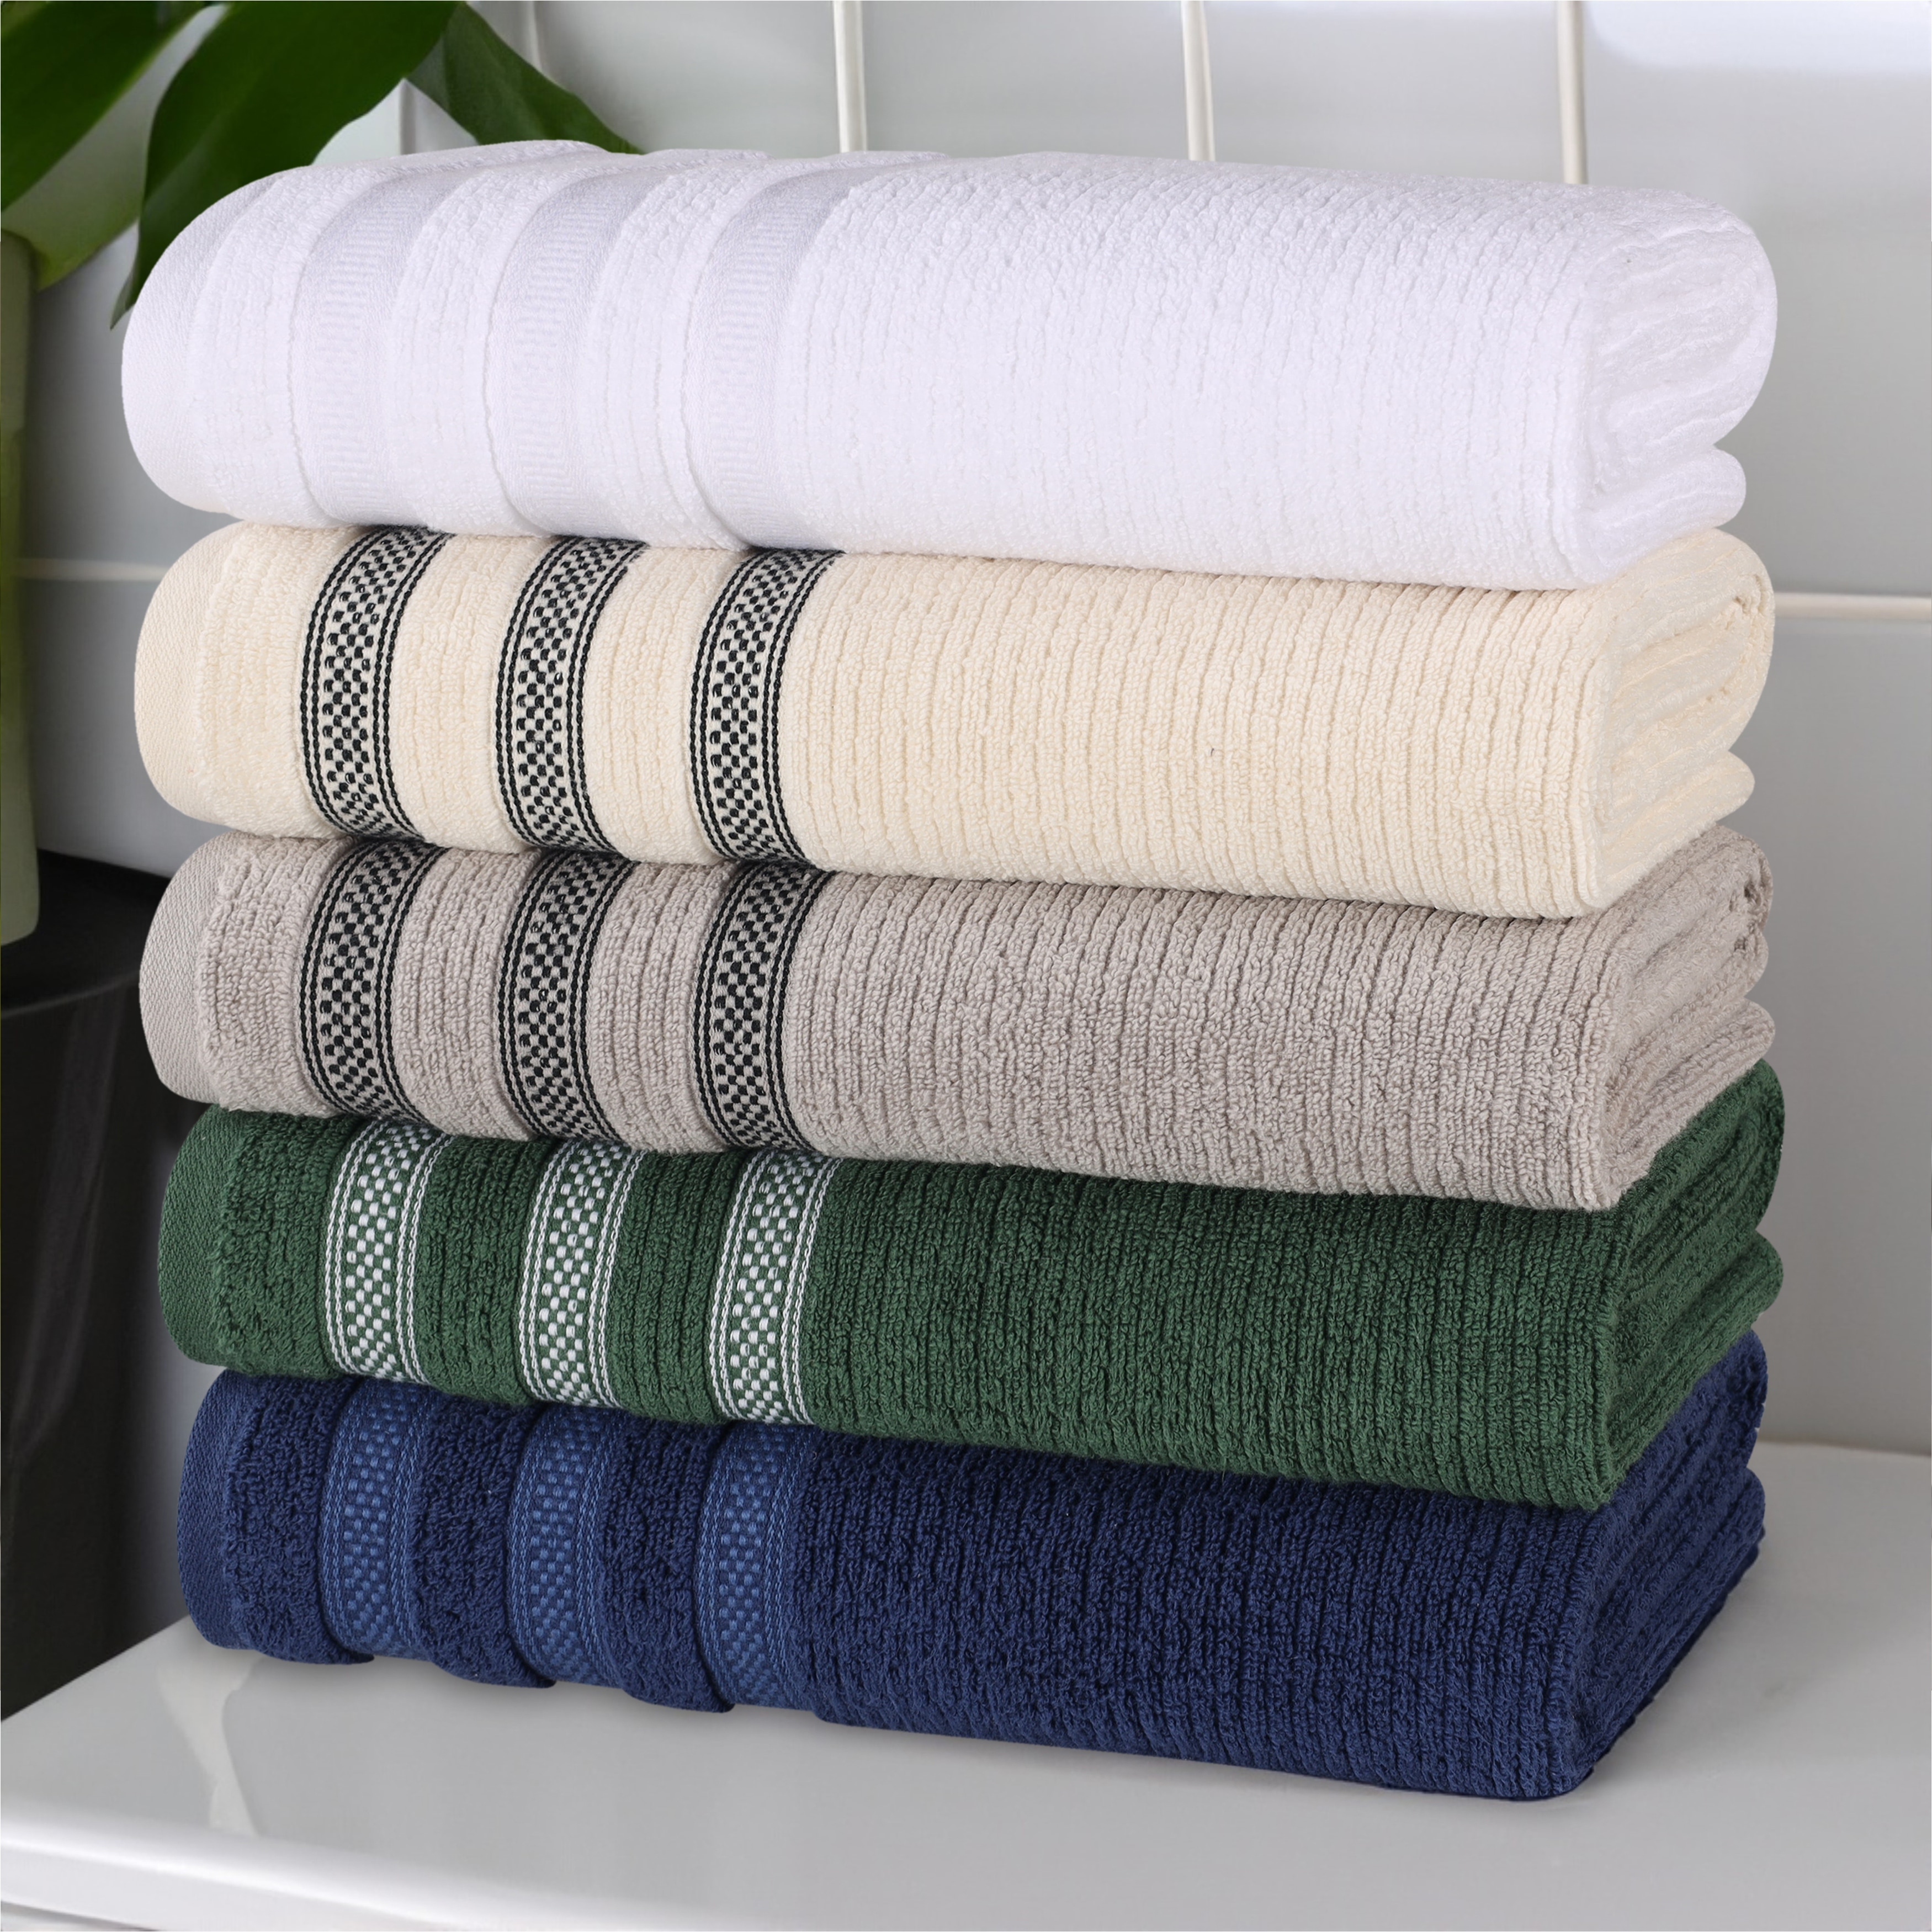 Set of 6 Hand Towels 100% Cotton Large Hand/Salon Towels Set (6-Pack, 16x27  inches) Ivory